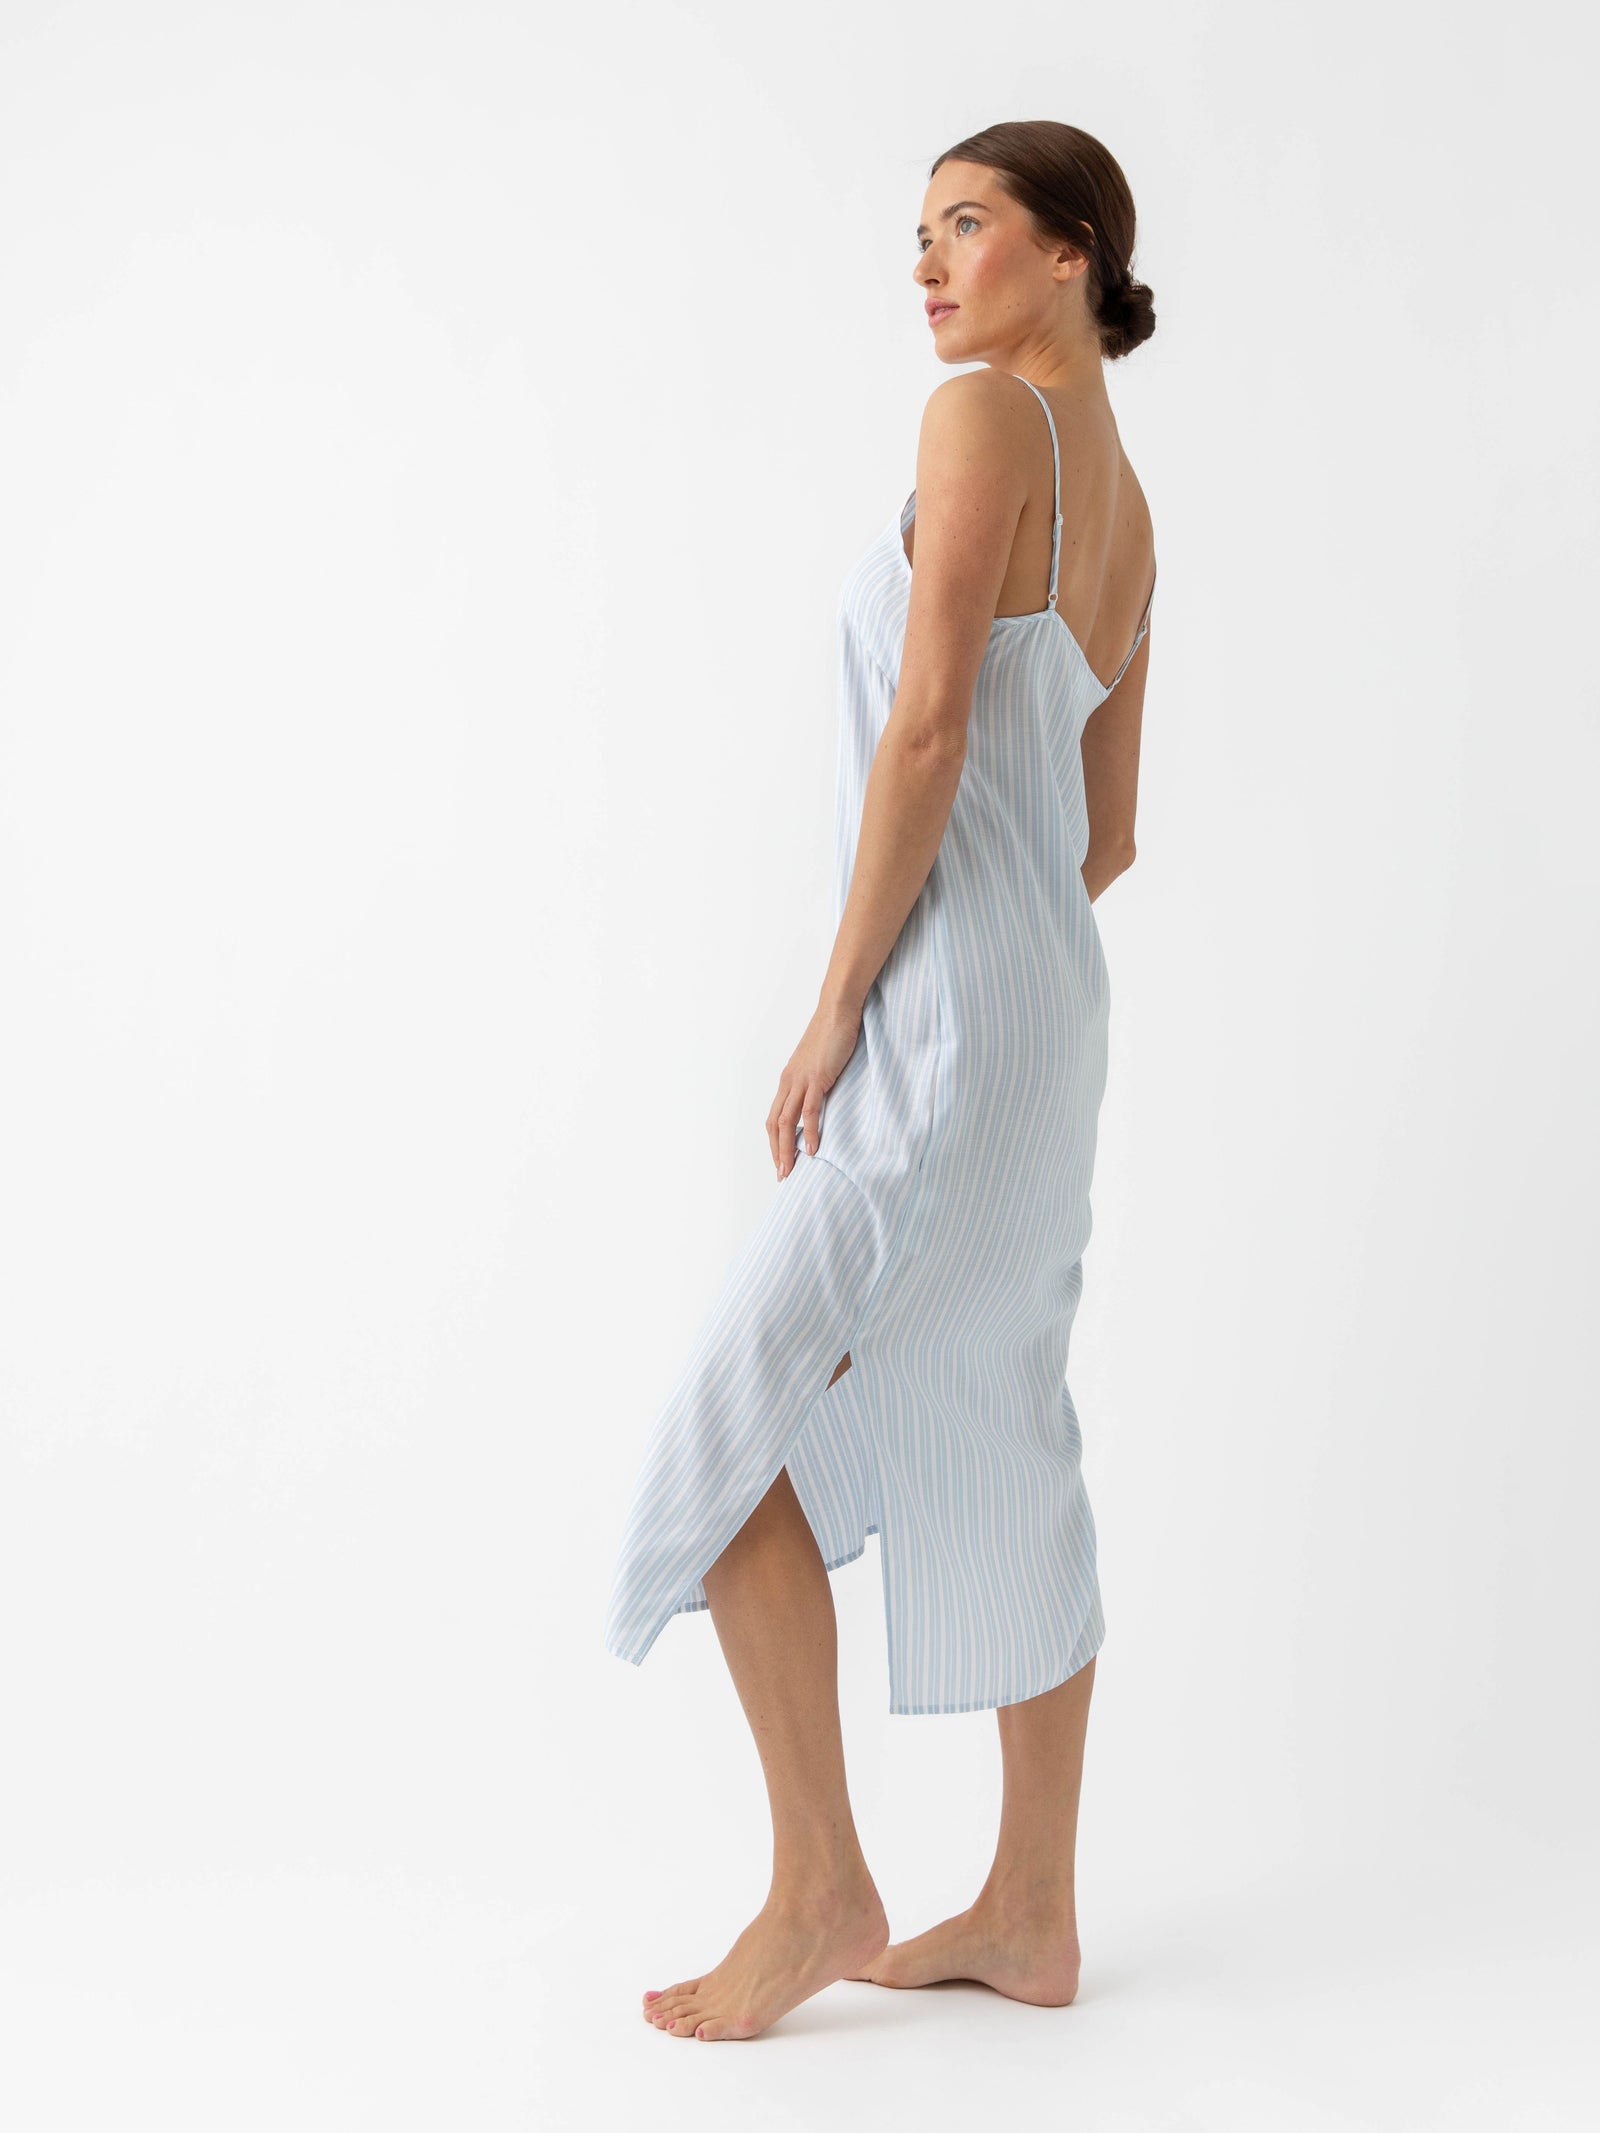 Woman in Spring Blue Stripe nightgown standing in front of white background 